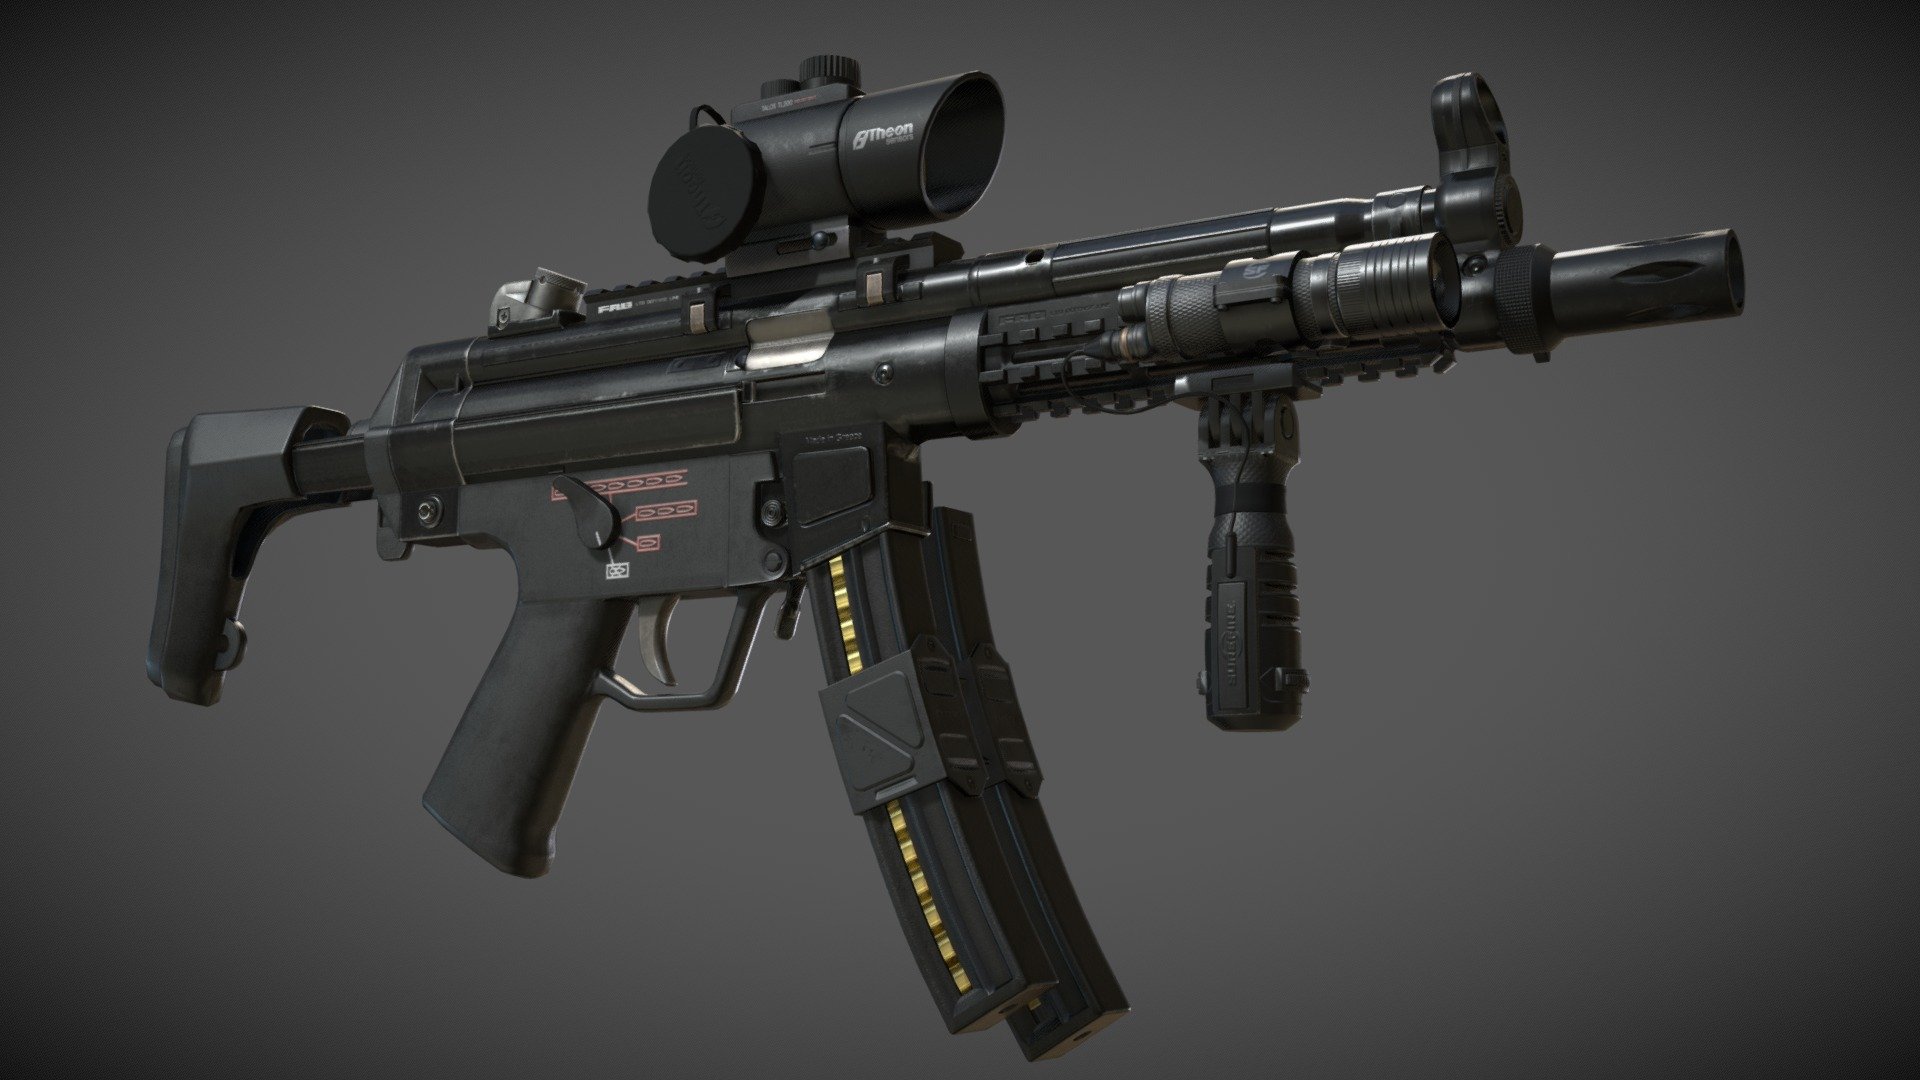 This my version of the famous H&amp;K MP5 submachine gun. Made for modern FPS games, this is the fully accessorized version. The gun is accurately modeled in its real size, parts that are useable/animateable are separeted with proper pivot/rotation points, and all the major components can be disassembled to provide for further in-game customization. Hi-res images and more in my Artstation page: https://www.artstation.com/artwork/BmDGVD - H&K MP5(A3) Fully Accessorized - Buy Royalty Free 3D model by Spyros Frigas (@Spyros_F) 3d model